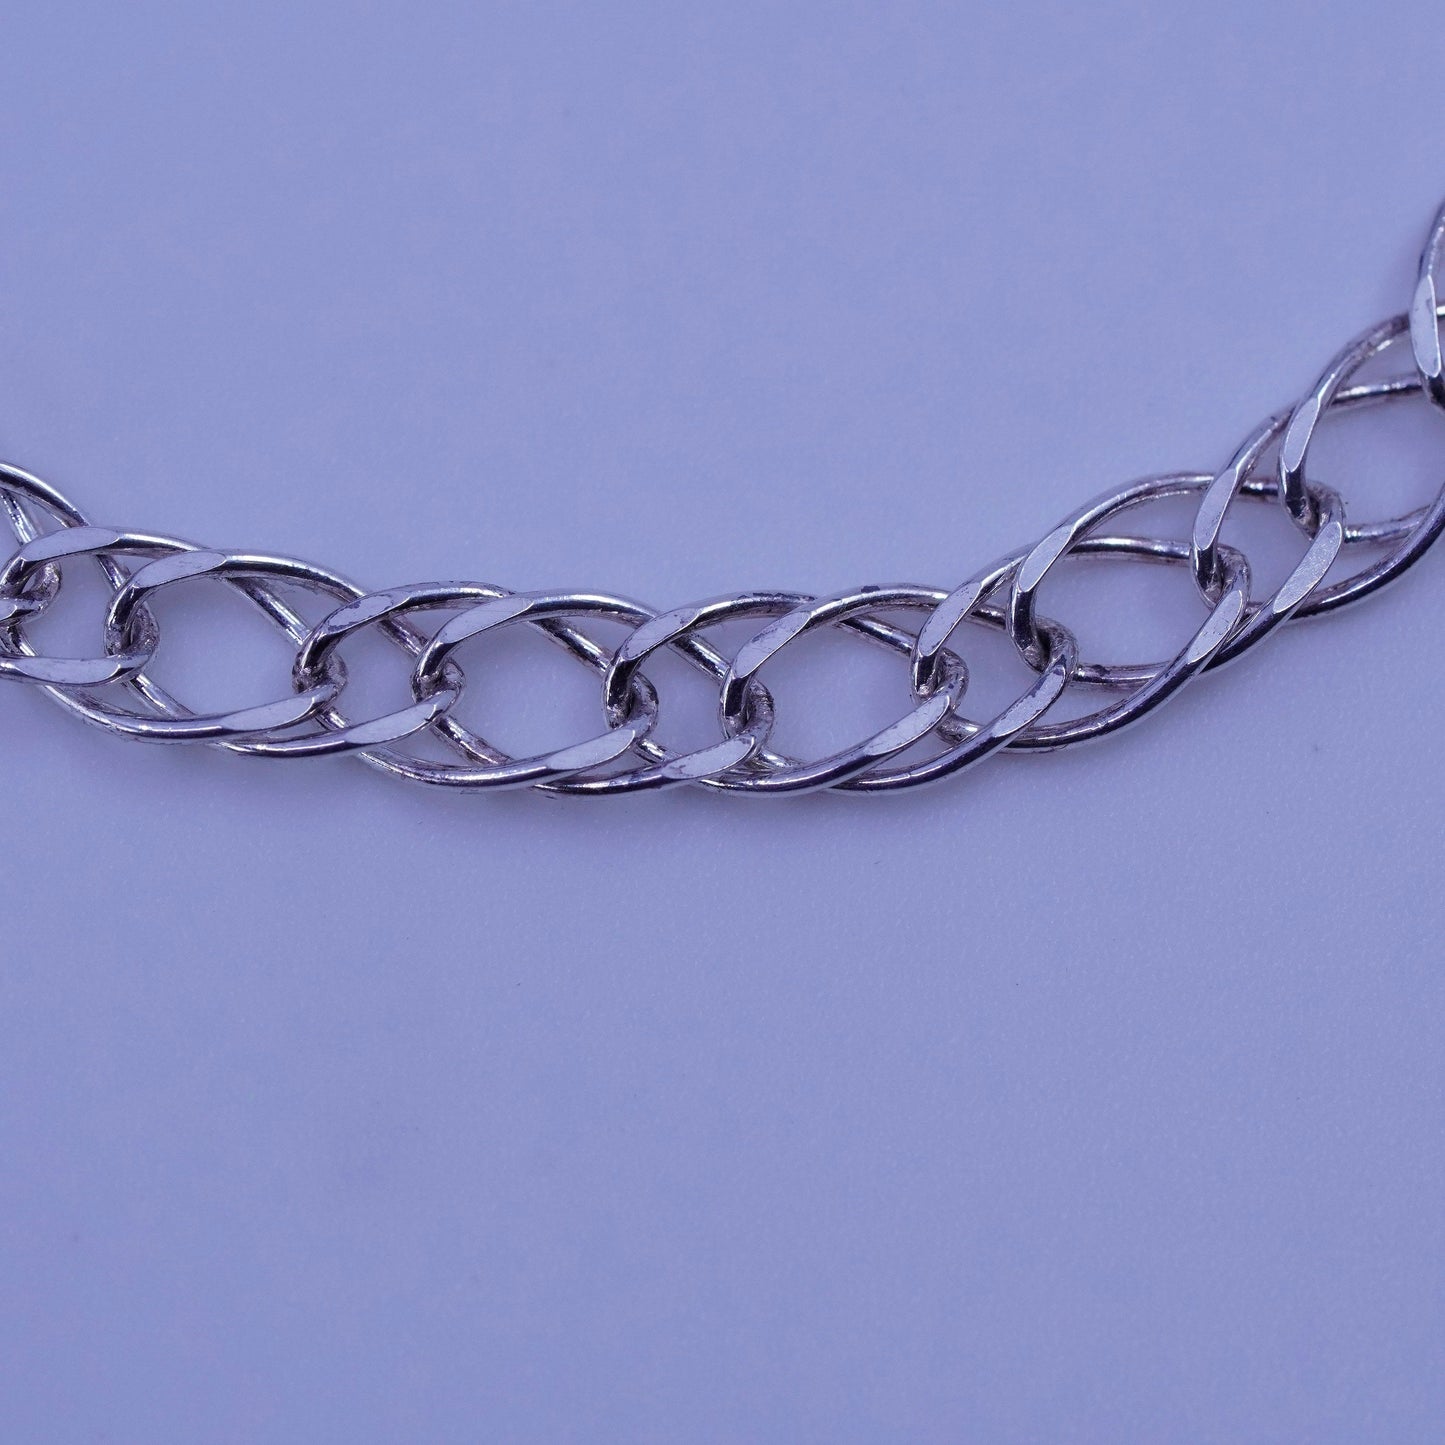 6.75”, Vintage Italy Sterling 925 silver handmade bracelet, double curb chain